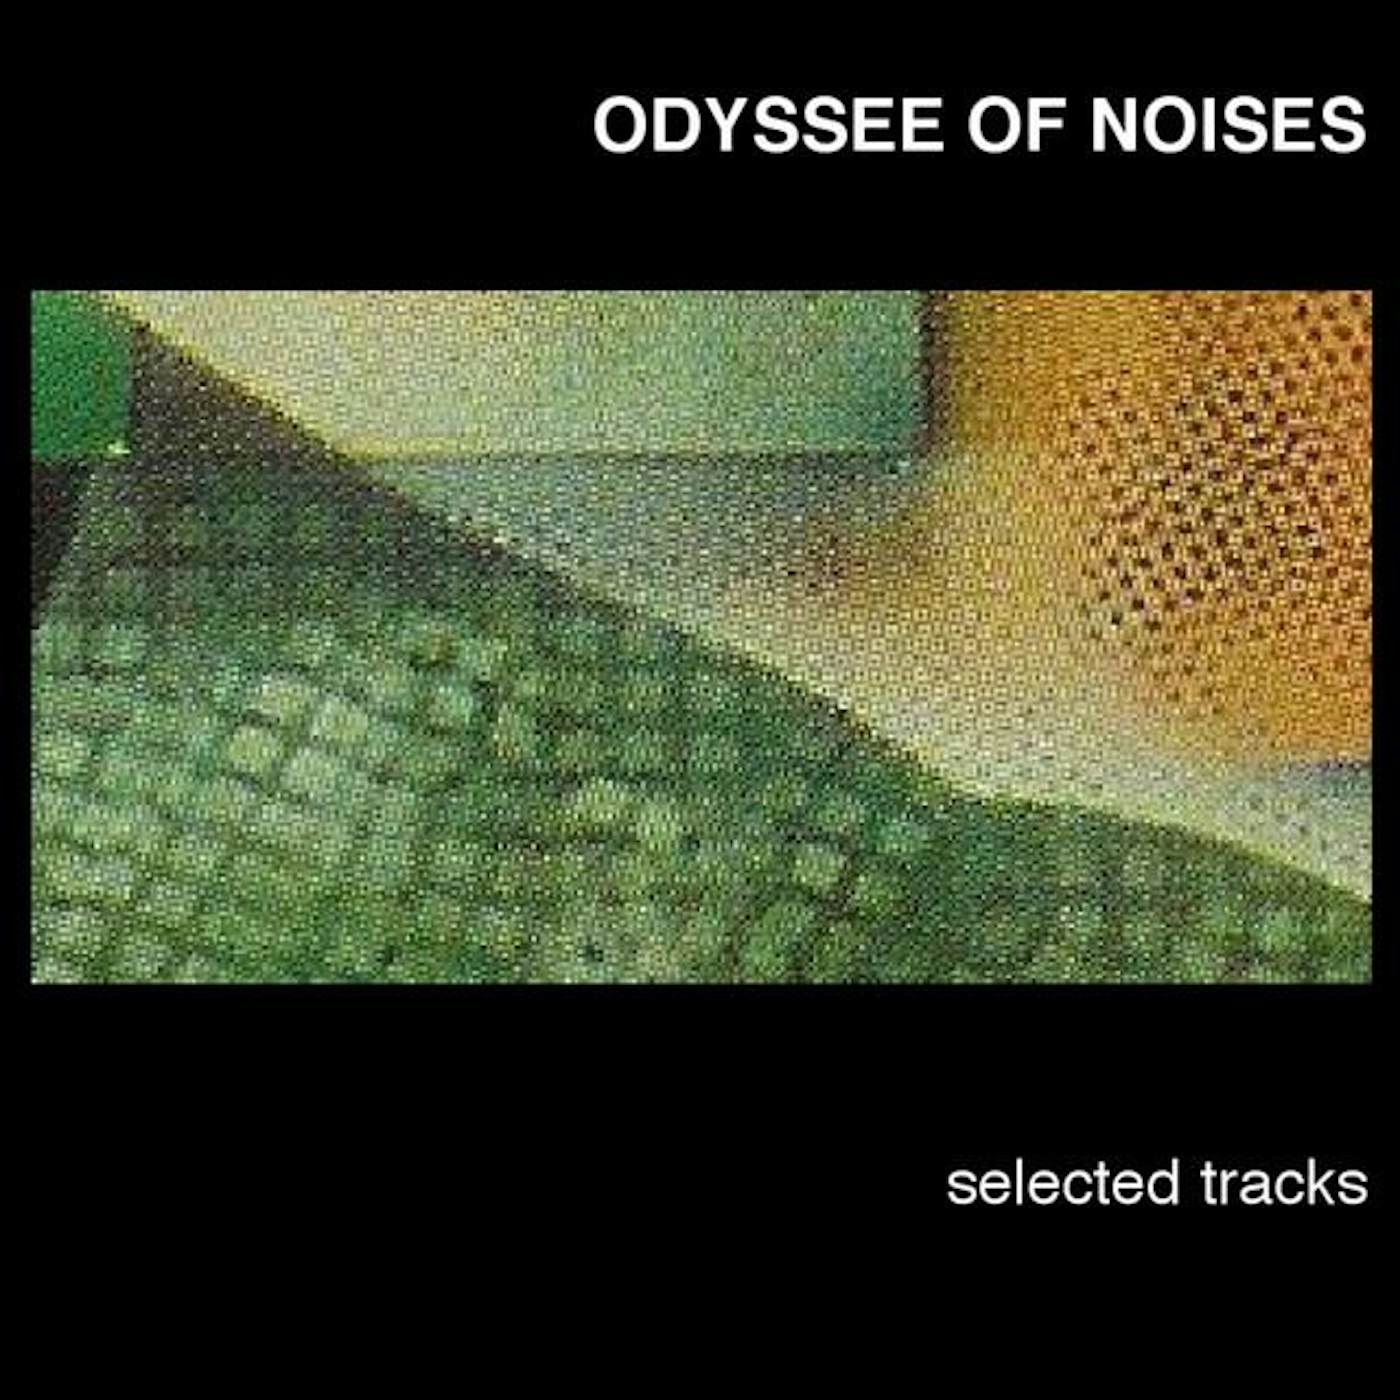 Odyssee of Noises